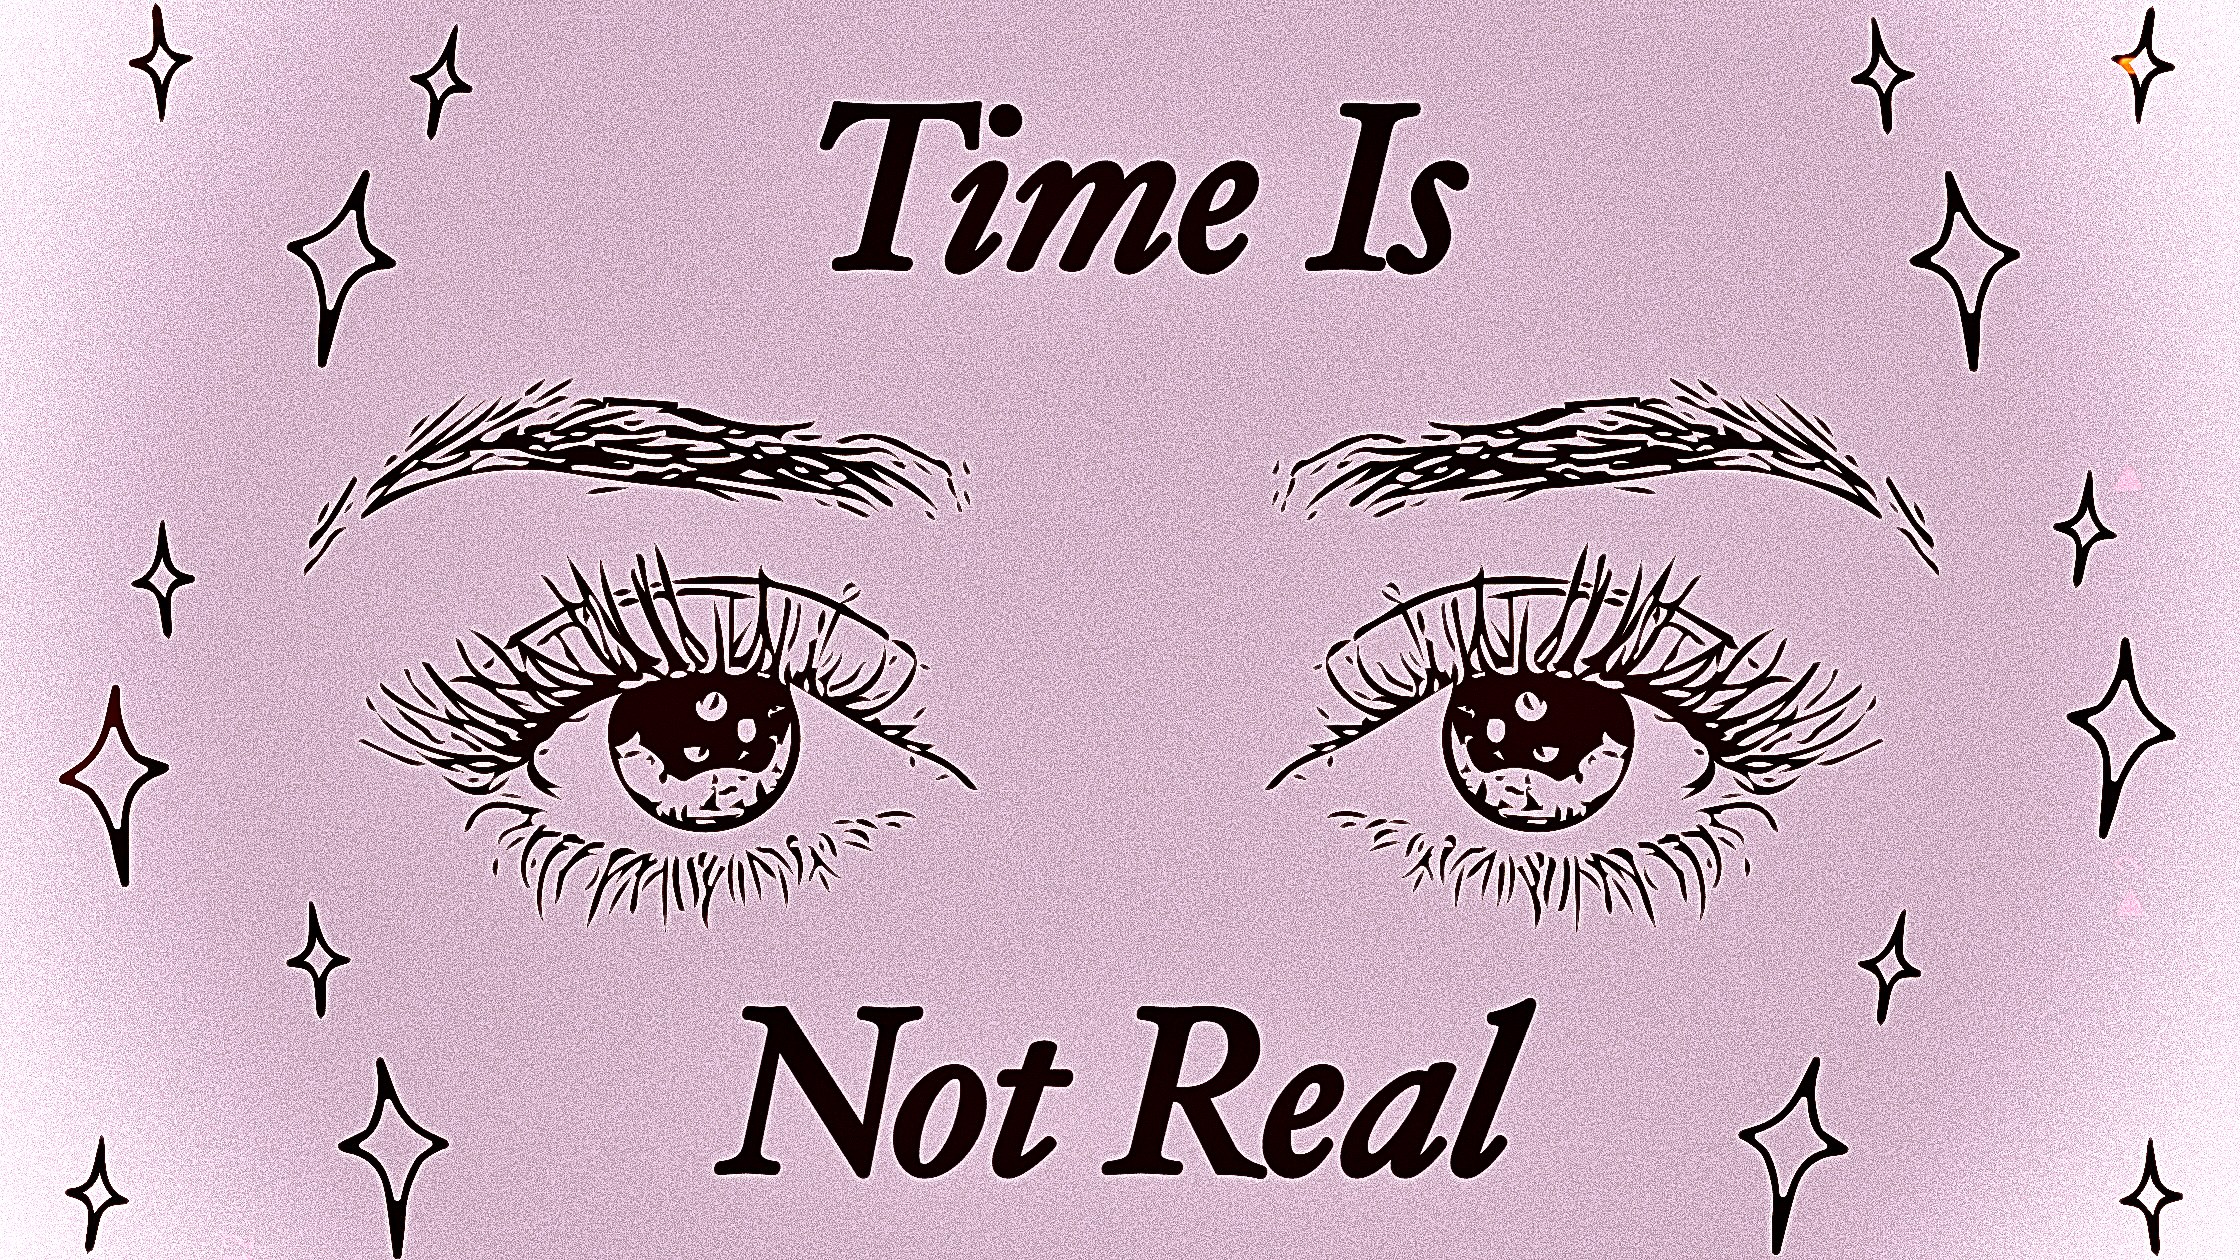 drawing of eyes surrounded by stars with the text “time is not real”